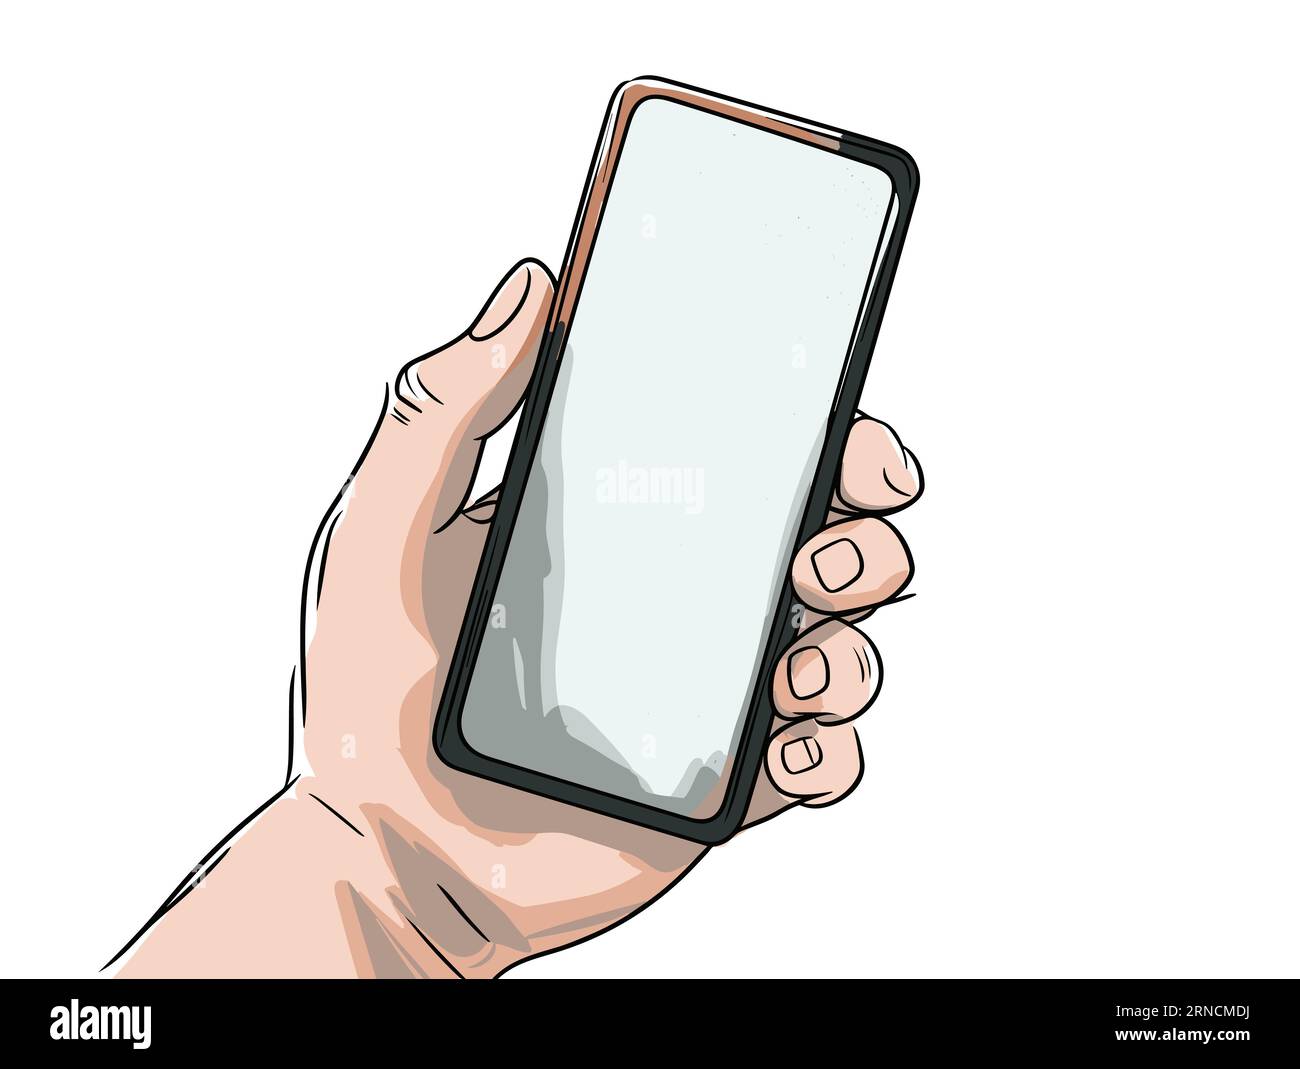 Hand Holding Phone And Blank White Screen Vectorbp, In The Style Of Characteristic Comic Book Art, Referential Painting, Detailed Shading Stock Vector